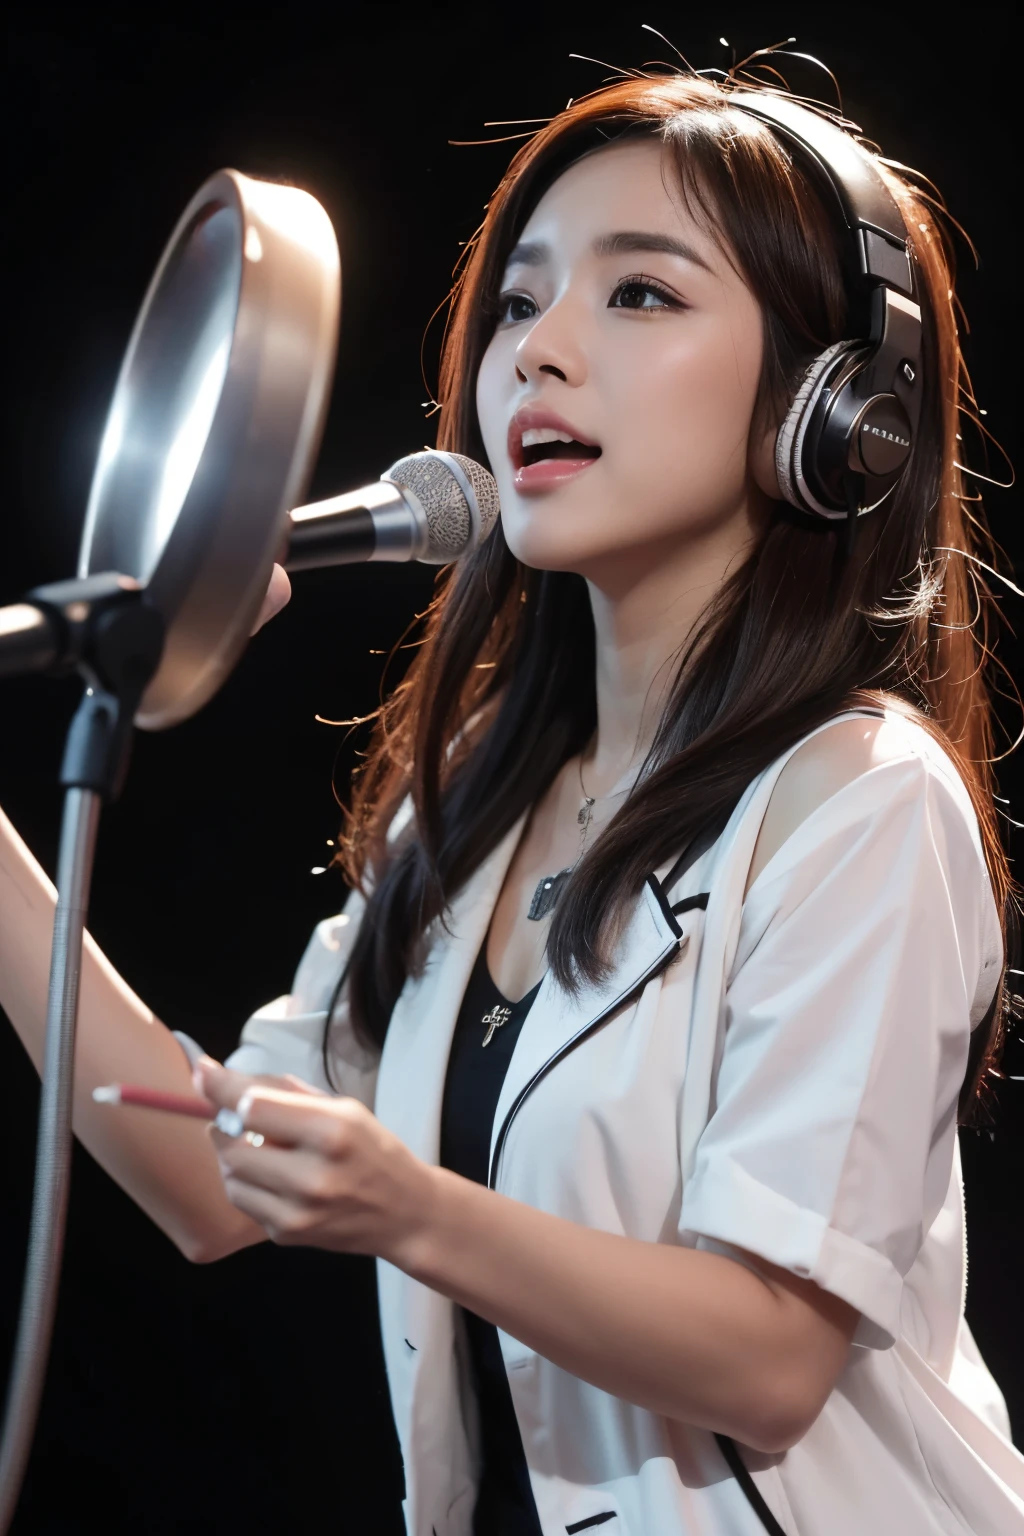 8k, highest quality, ultra details, Indonesian singer named Sella, music, performance, studio recording, headphones, microphone, passionate expression.